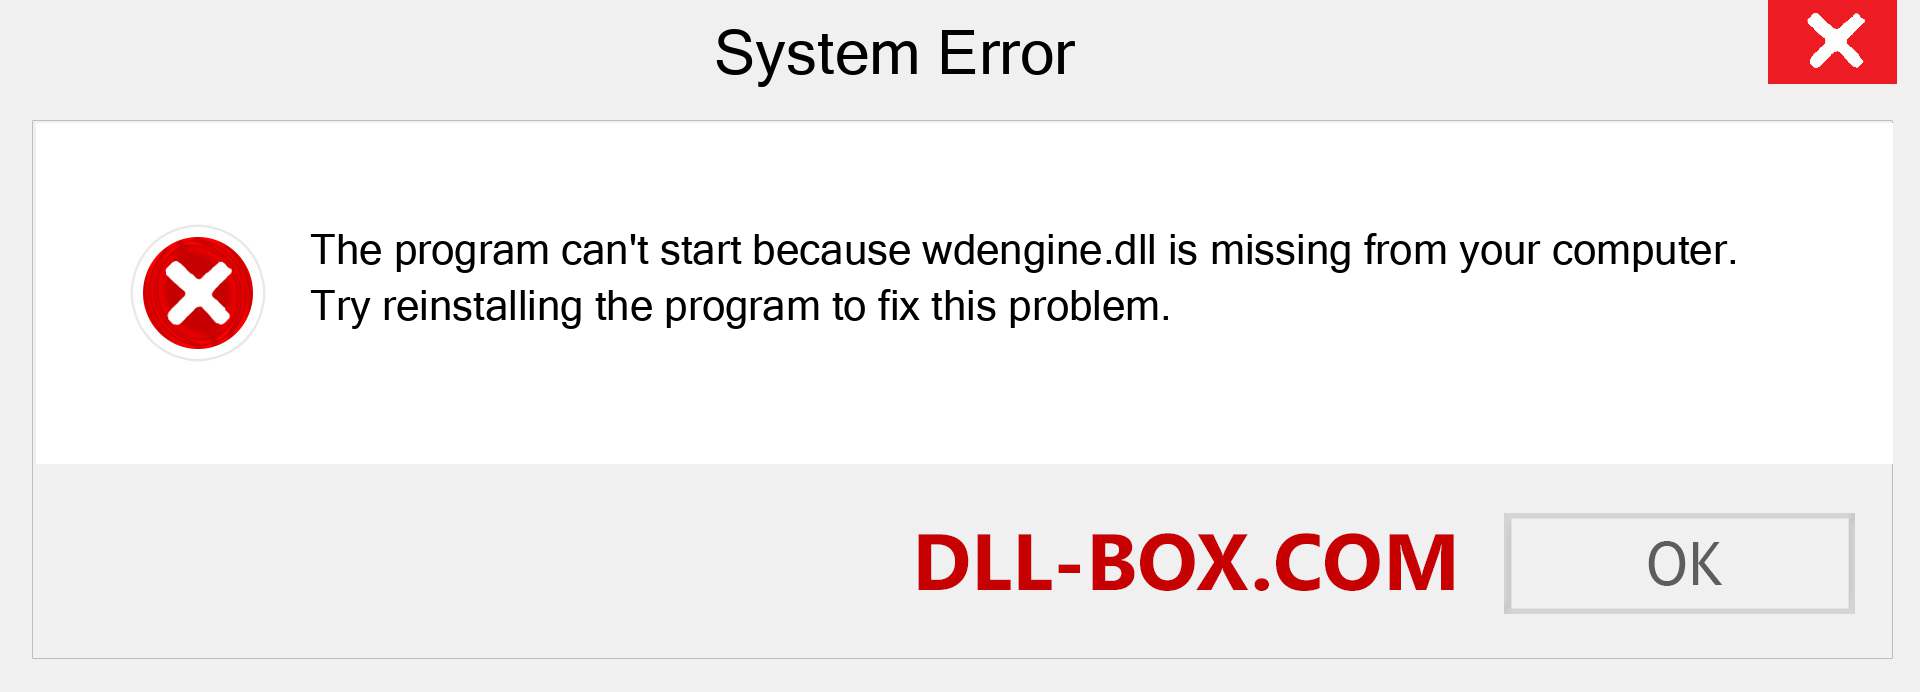  wdengine.dll file is missing?. Download for Windows 7, 8, 10 - Fix  wdengine dll Missing Error on Windows, photos, images